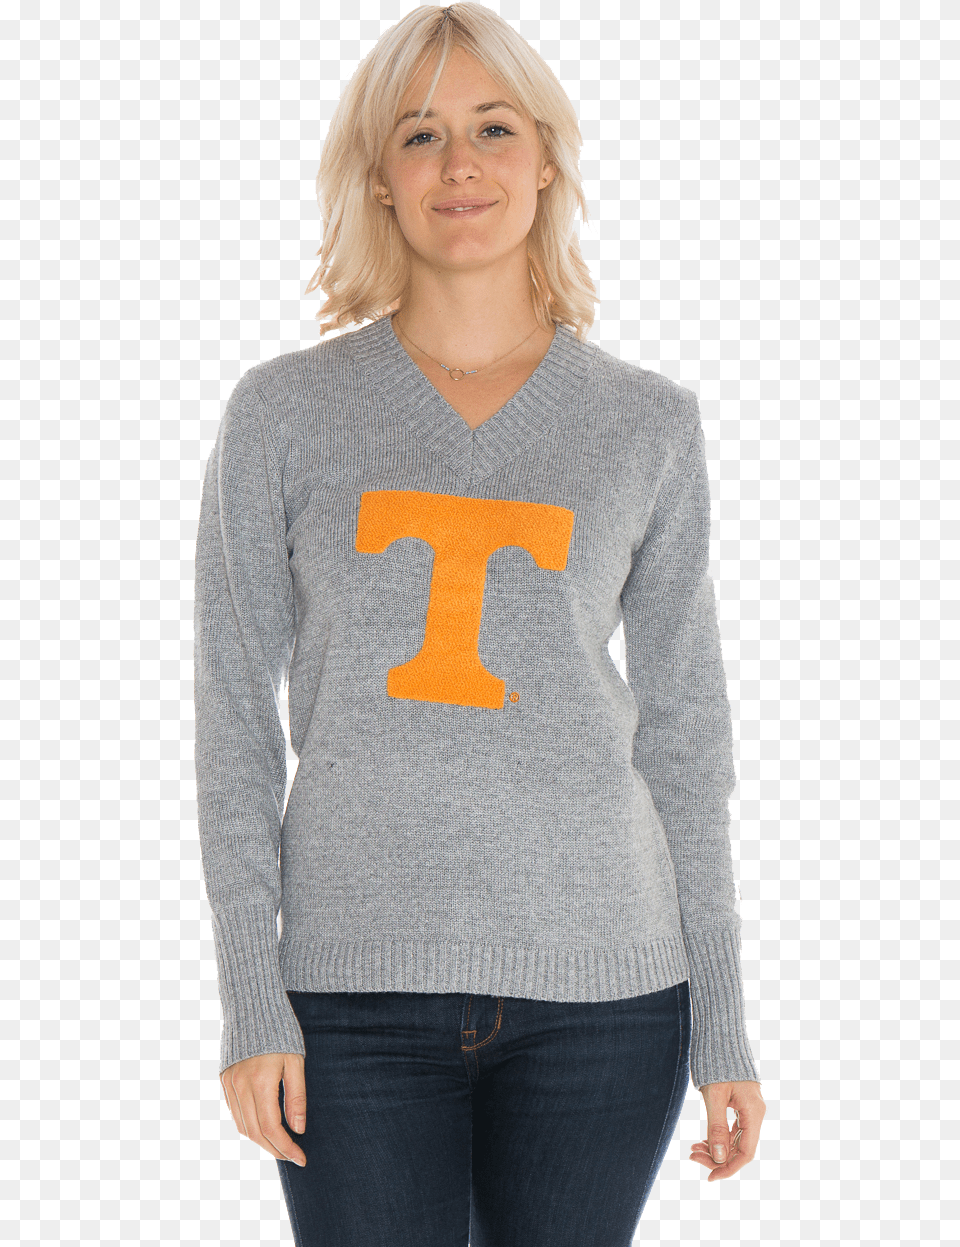 University Of Tennessee Vols Women39s V Neck Sweater, Adult, Person, Knitwear, Woman Png